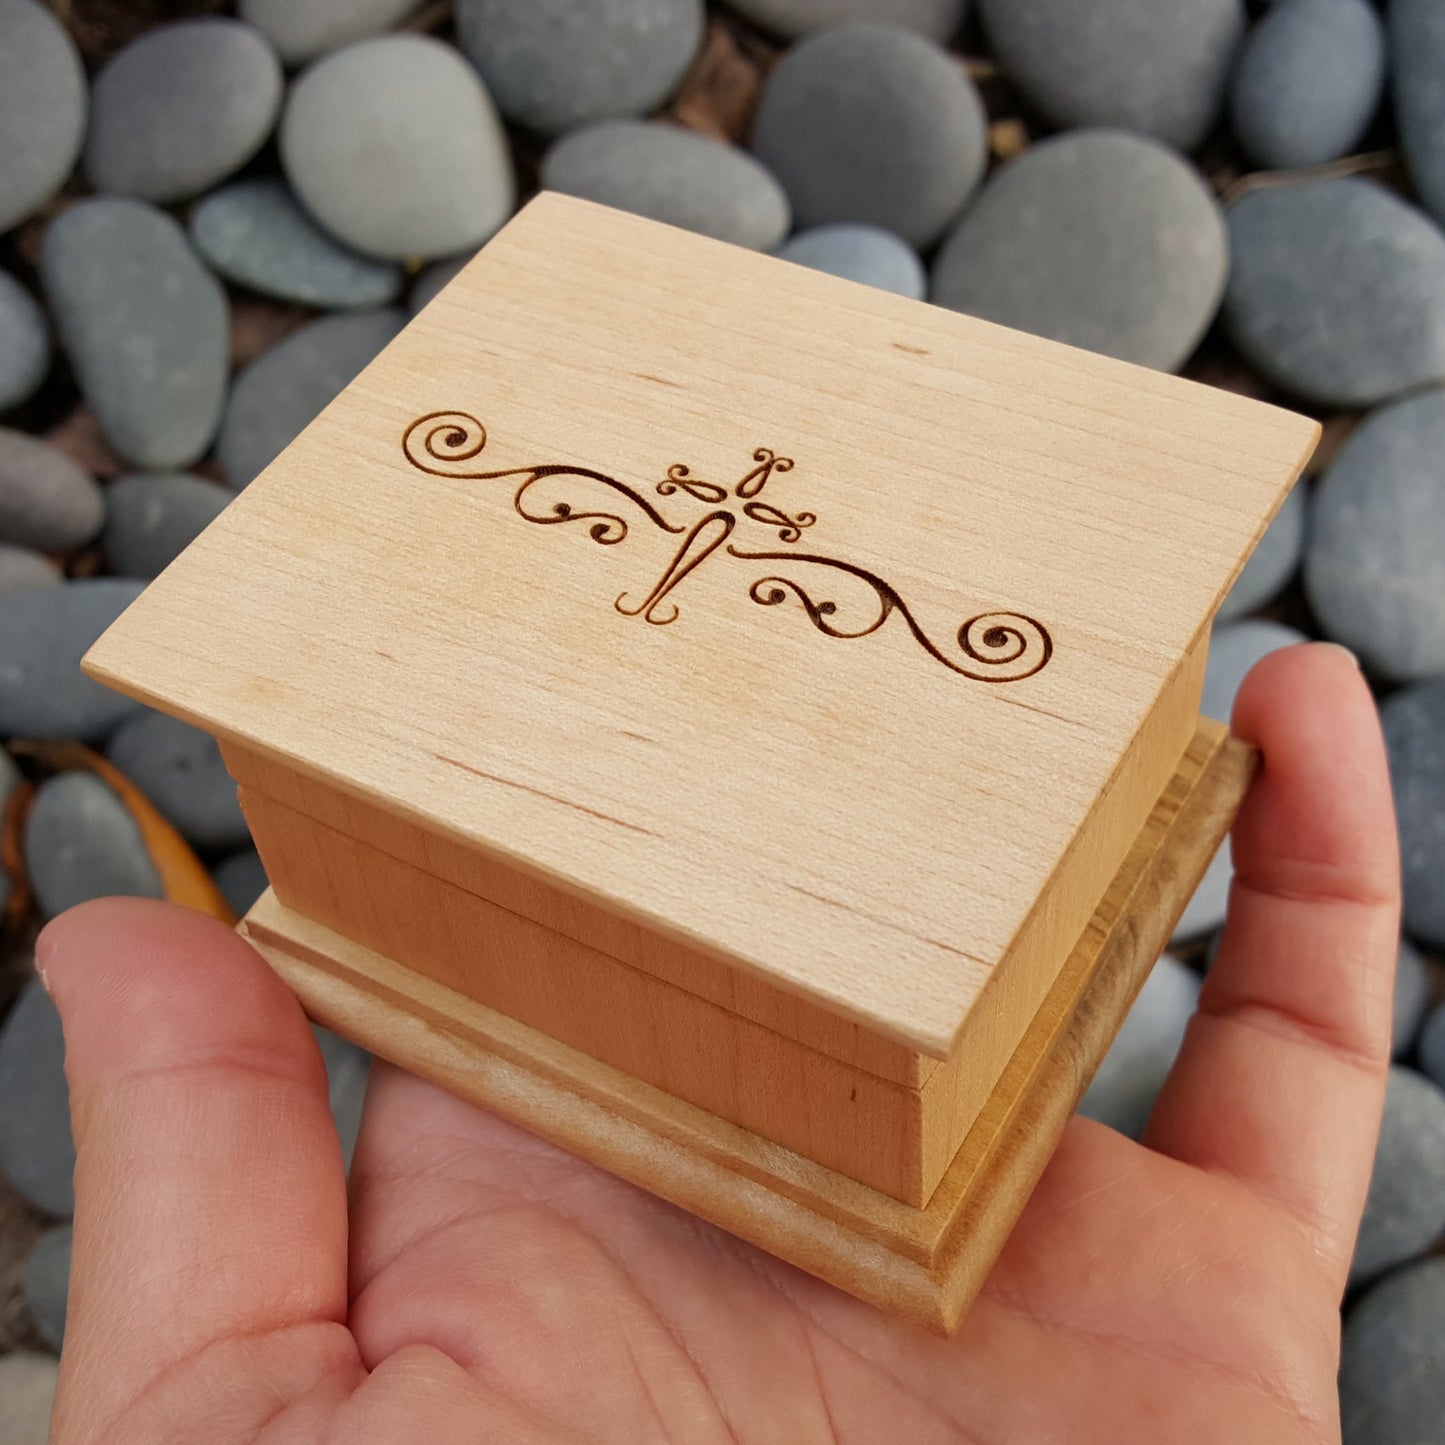 Christian Music box, with cross engraving custom-made with your choice of color and song, personalize